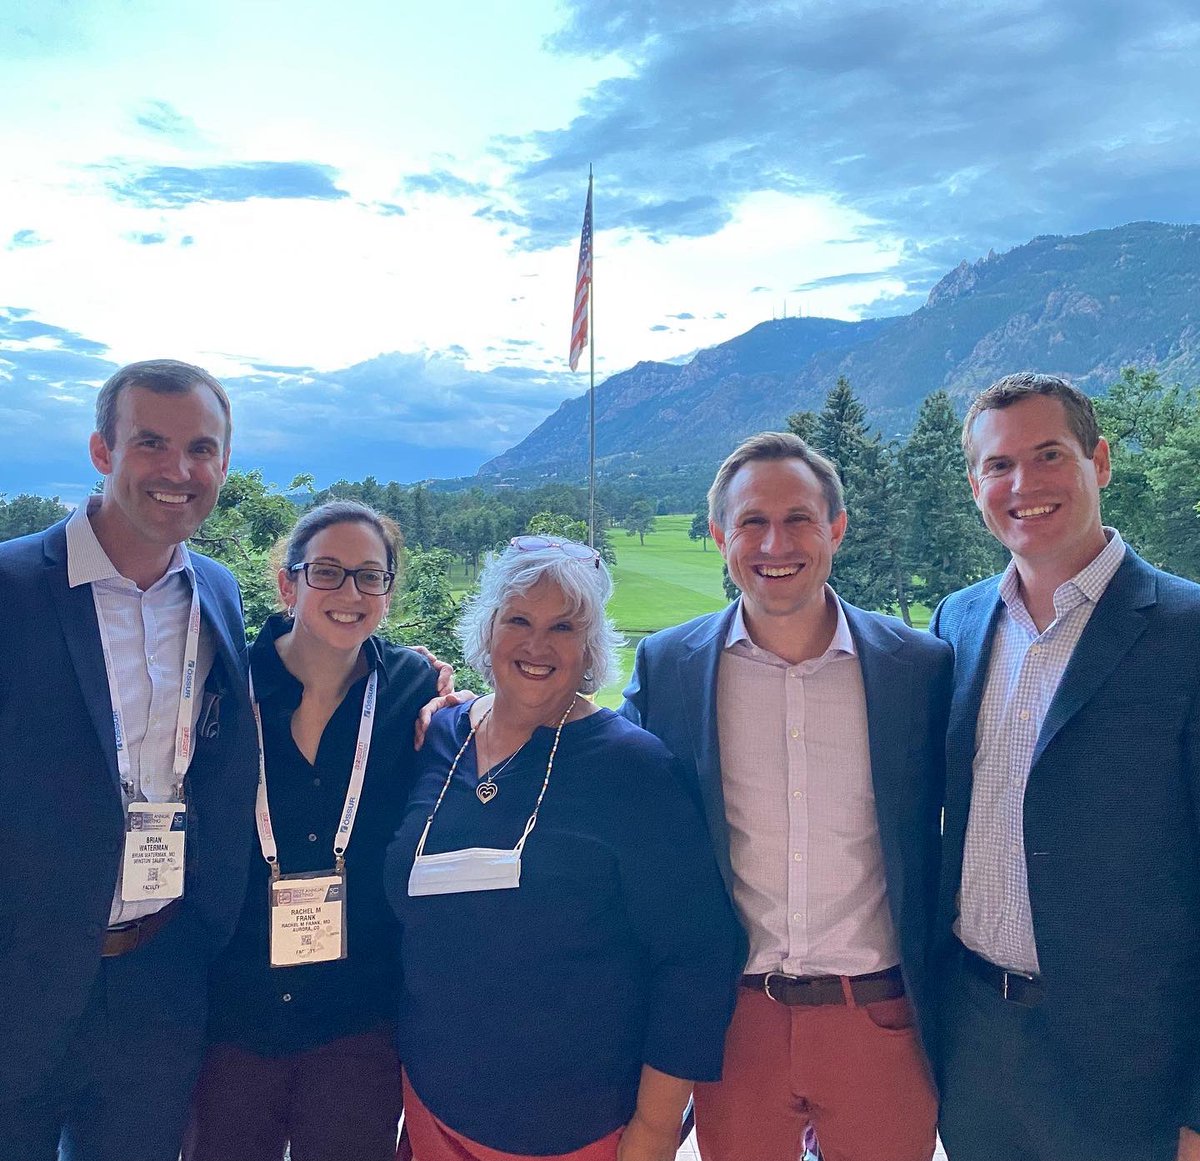 With 50 years under its belt, @AOSSM_SportsMed annual meeting is finally a wrap. Great job to Rick Wright & @doccasslee on an excellent #AOSSM2022 program. Always energizing to be around friends & mentors while sharing lessons learned & soaking in some ⛰ scenery. 🙌